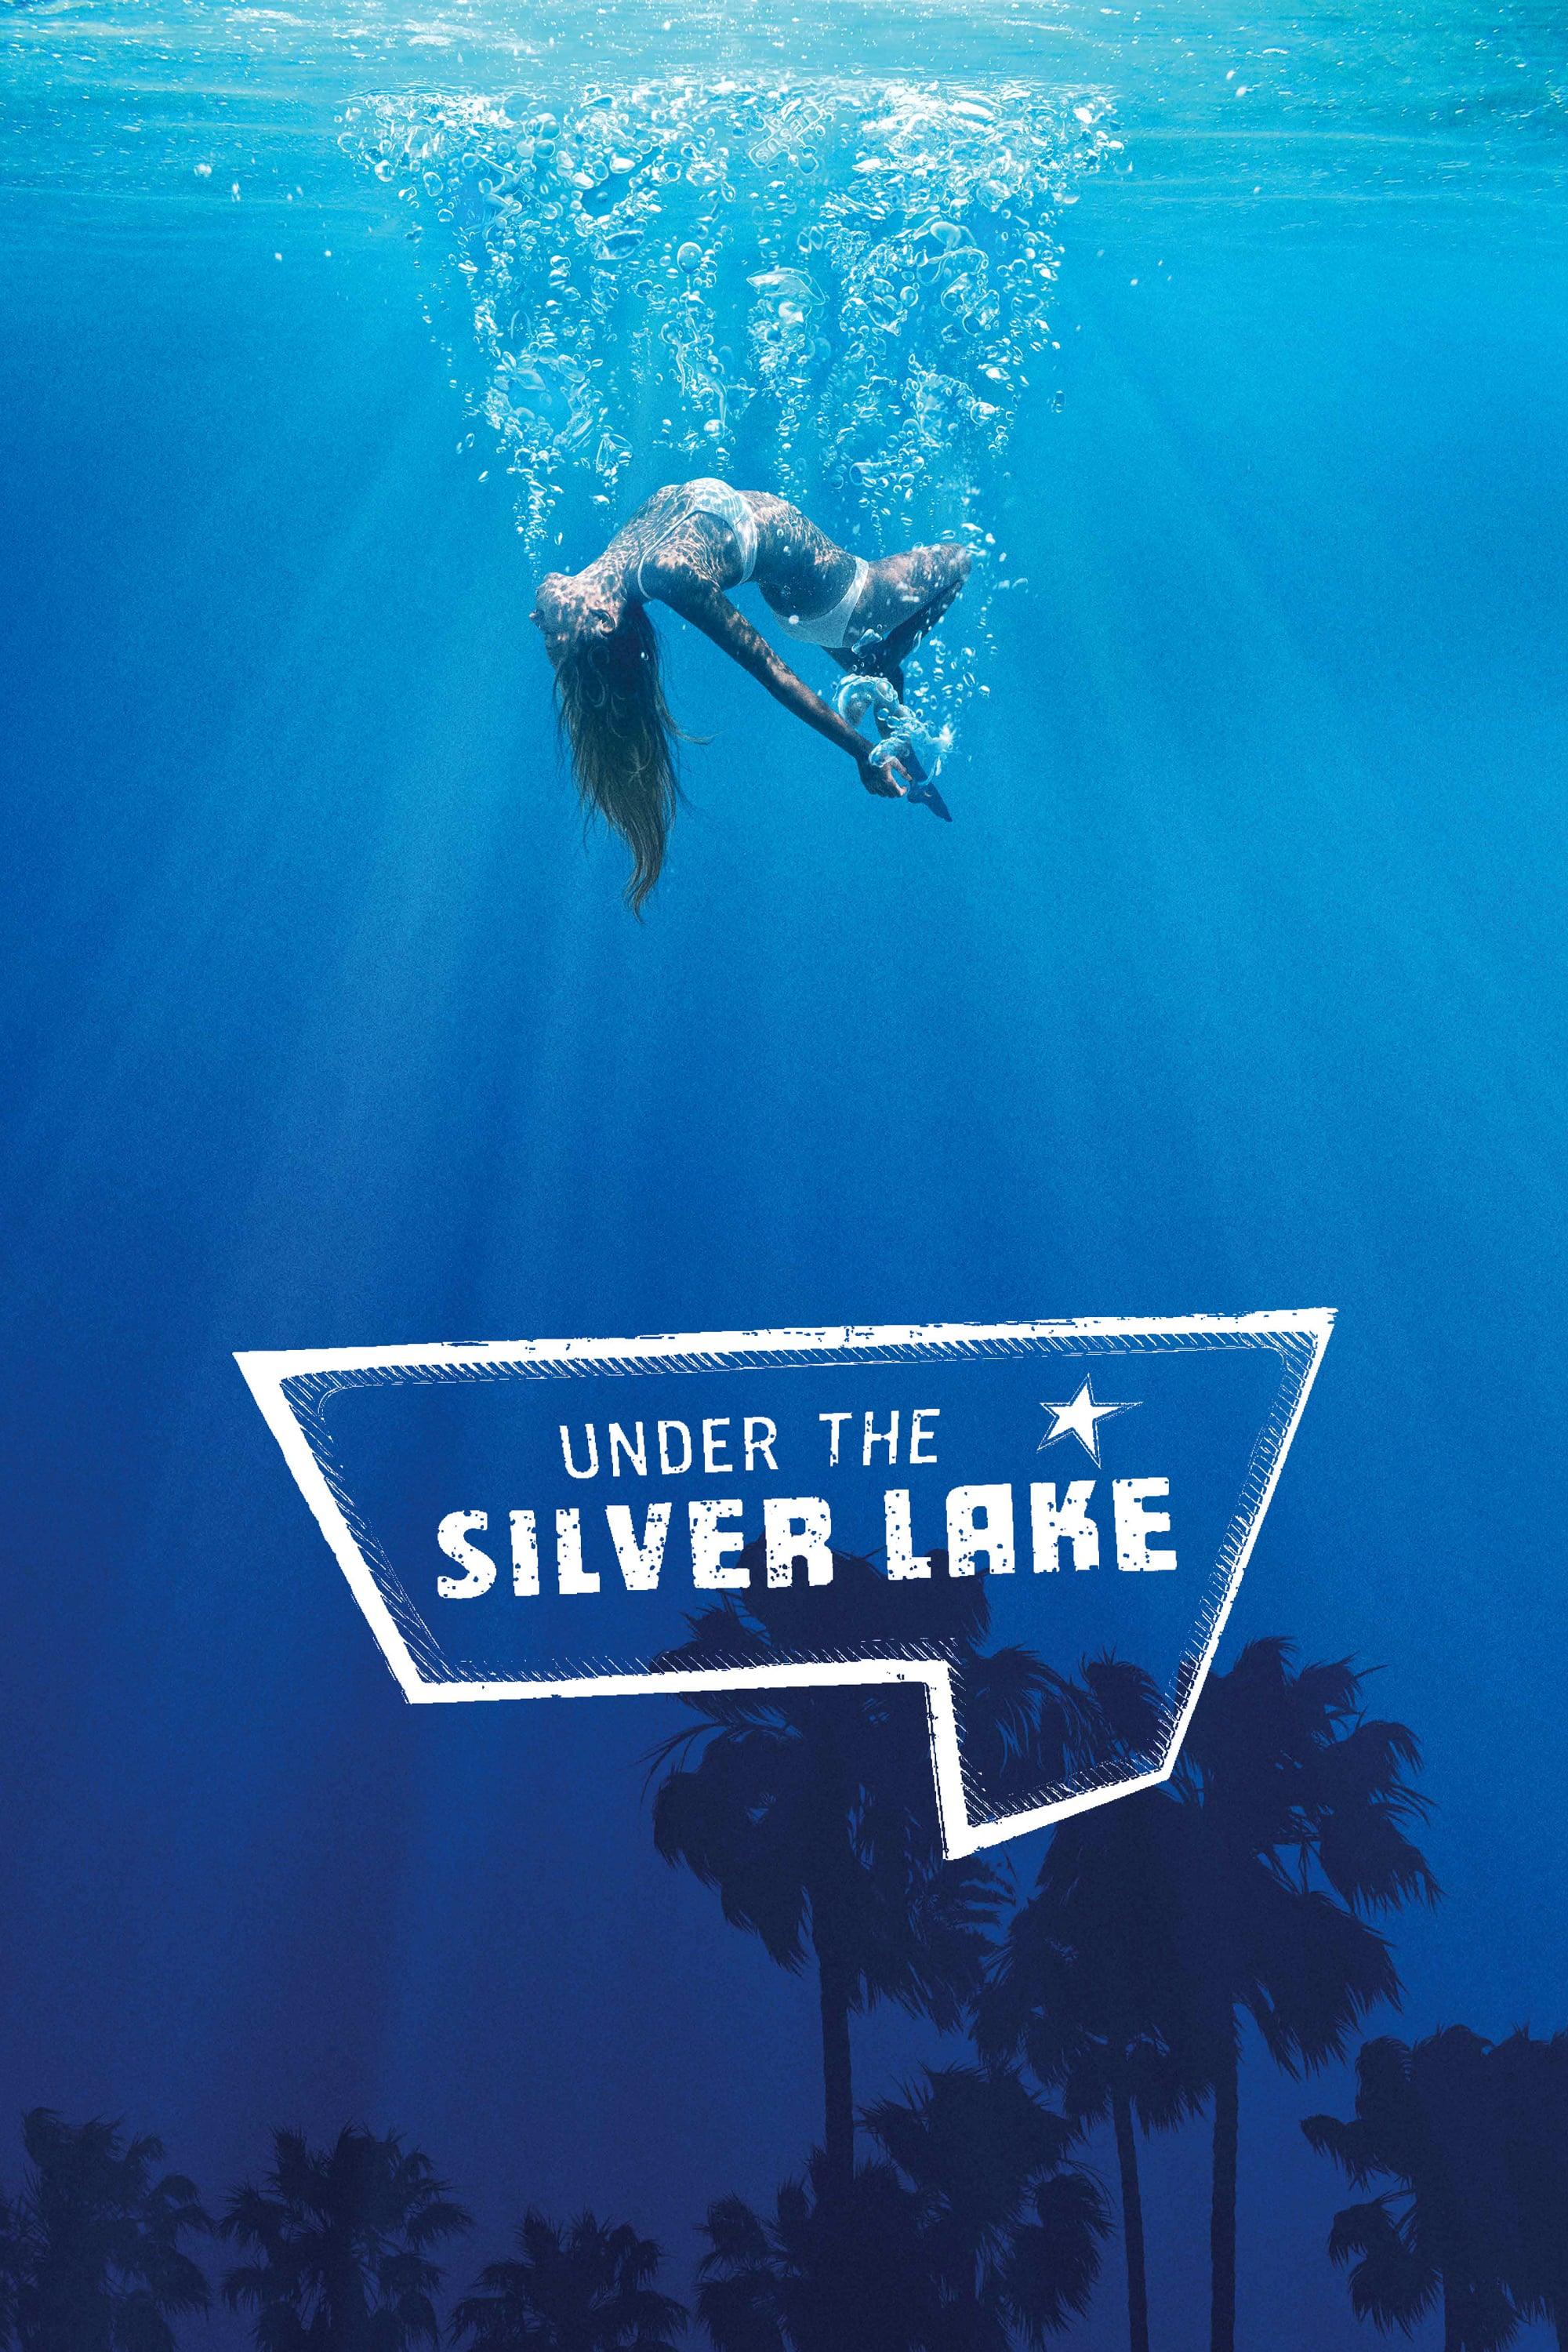 Under The Silver Lake 2018 Movie Poster. Universal Movies